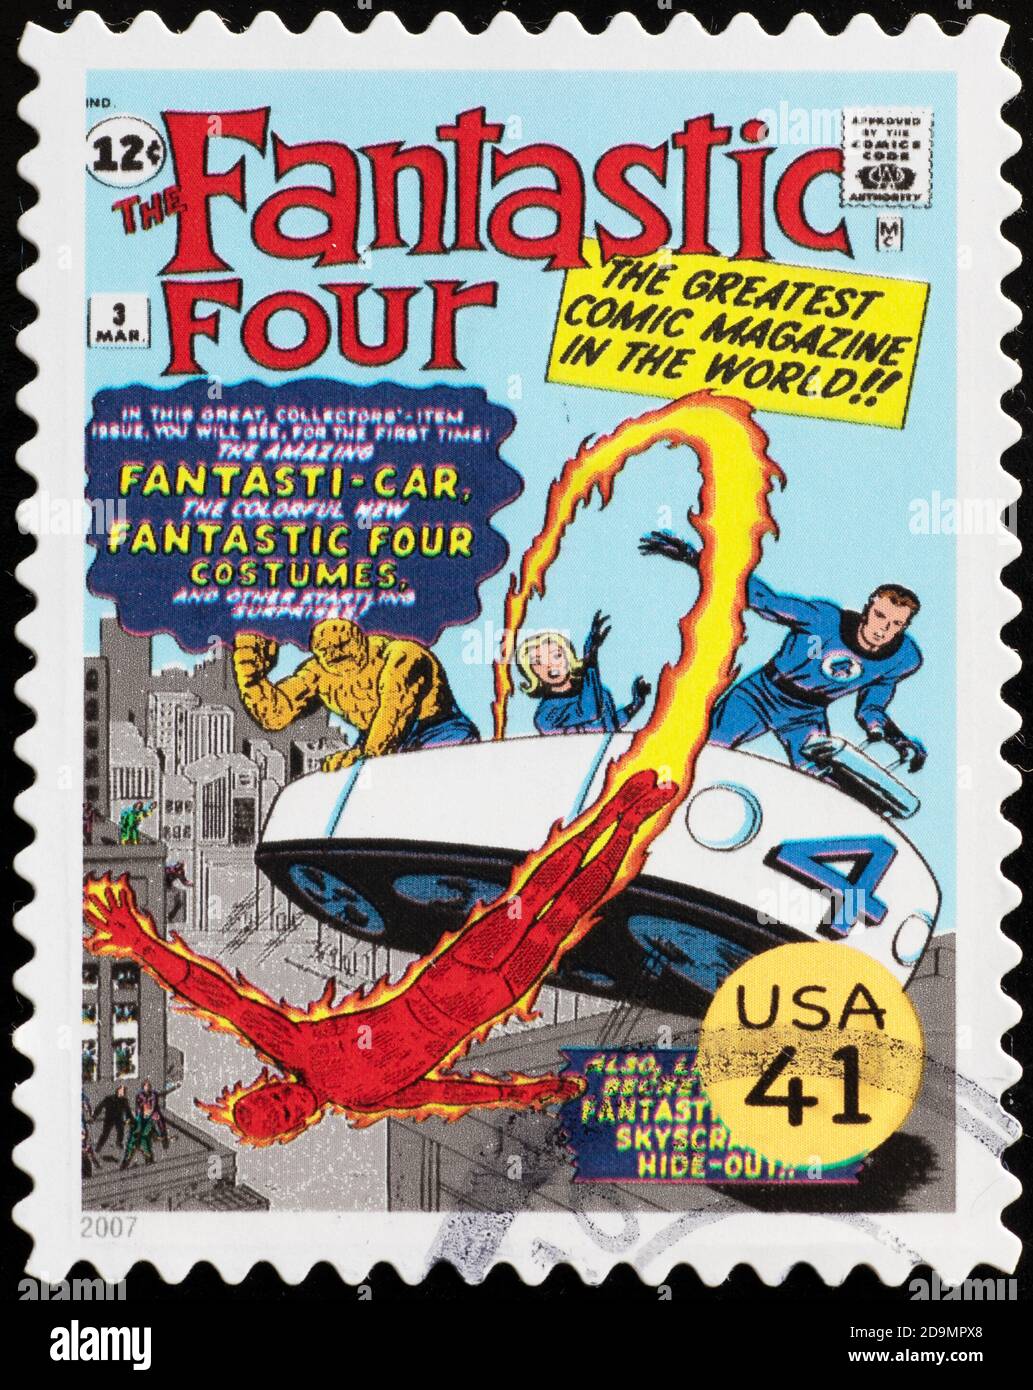 Cover of The Fantastic Four magazine on american stamp Stock Photo